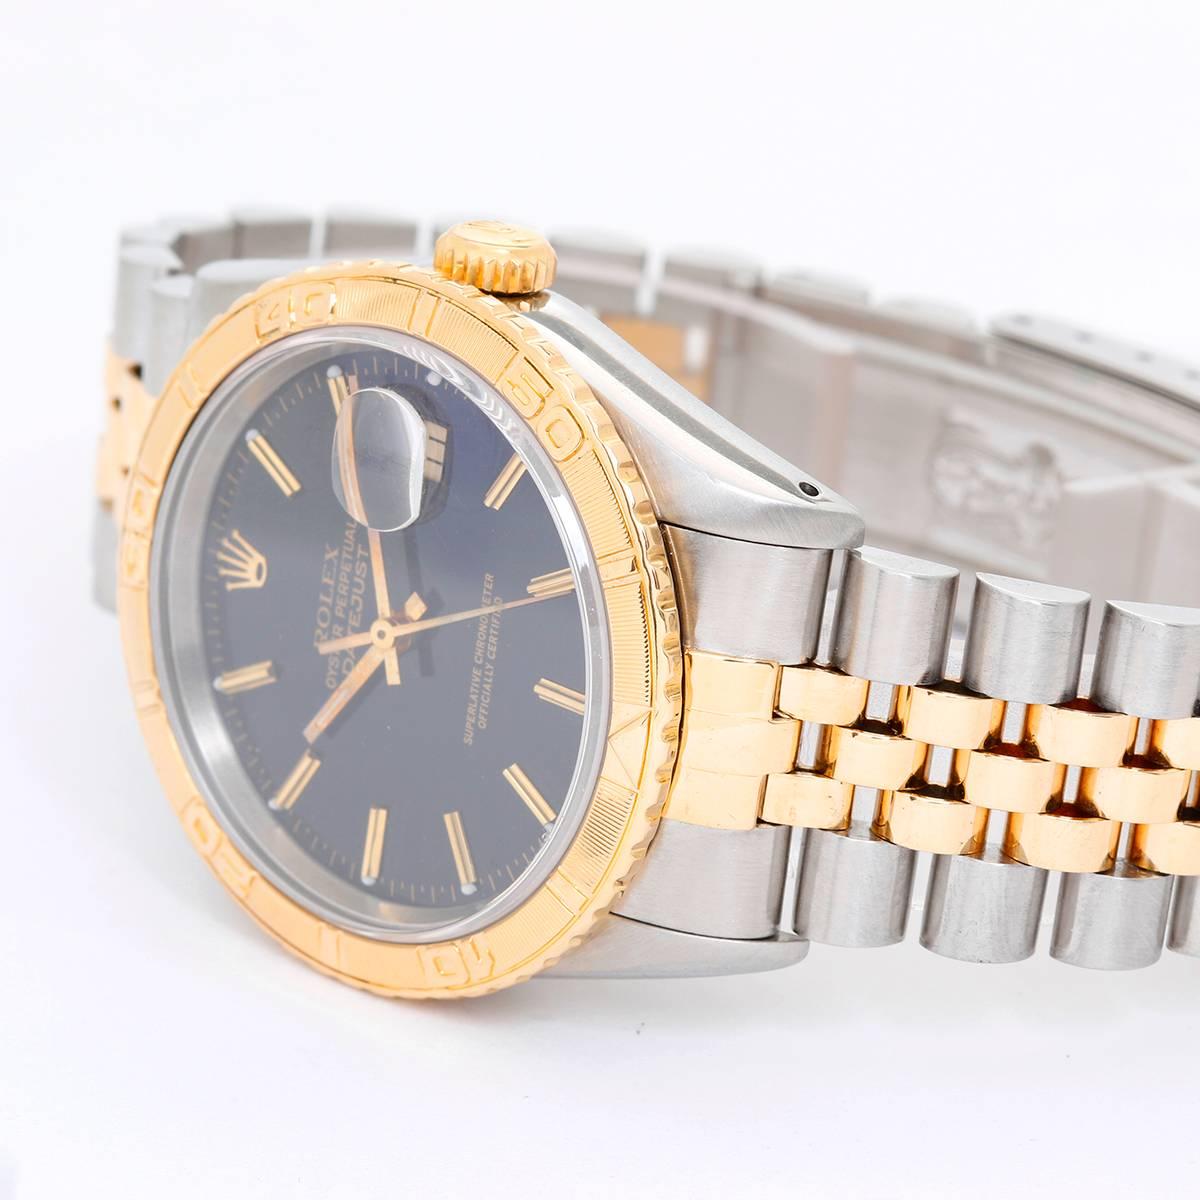 Rolex 2-Tone Turnograph Men's Steel & Gold Watch Steel 16263 -  Automatic winding with date; sapphire crystal. Stainless steel case with 18k yellow gold rotating Thunderbird bezel  (36mm diameter). Black dial with stick markers. Stainless steel and